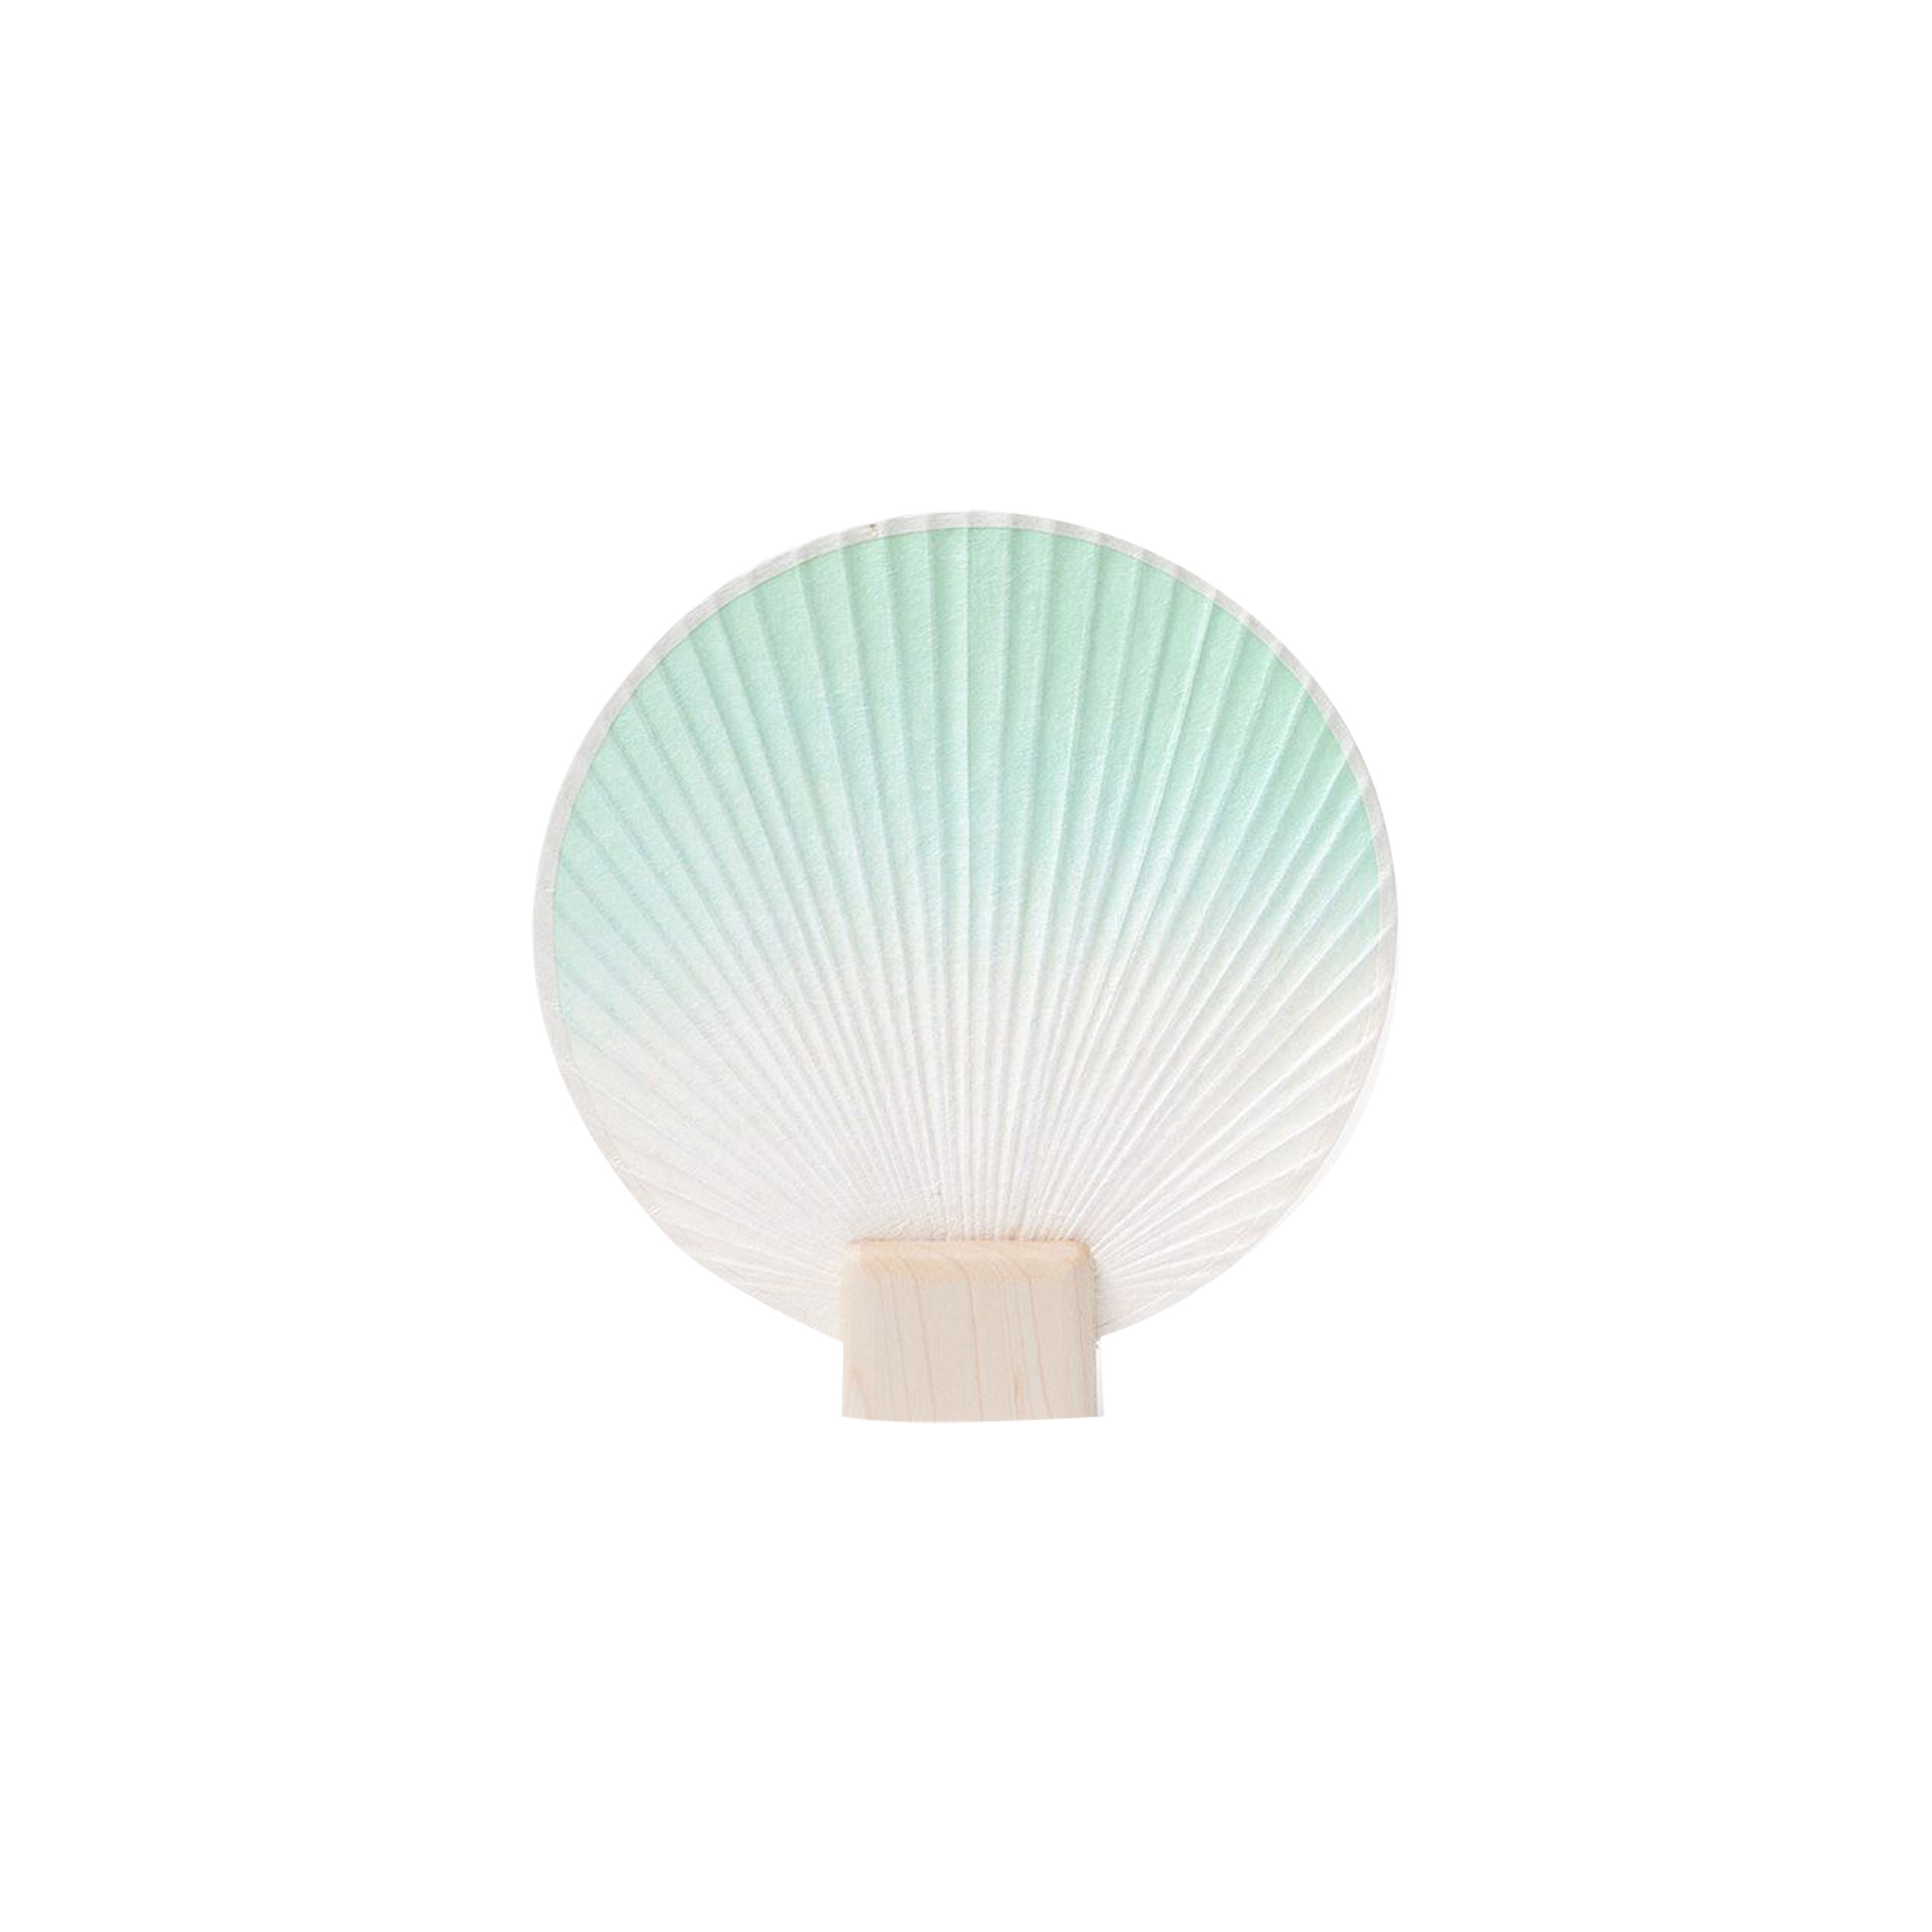 KHJ Studio Hand Crafted Fan Round Small in Green